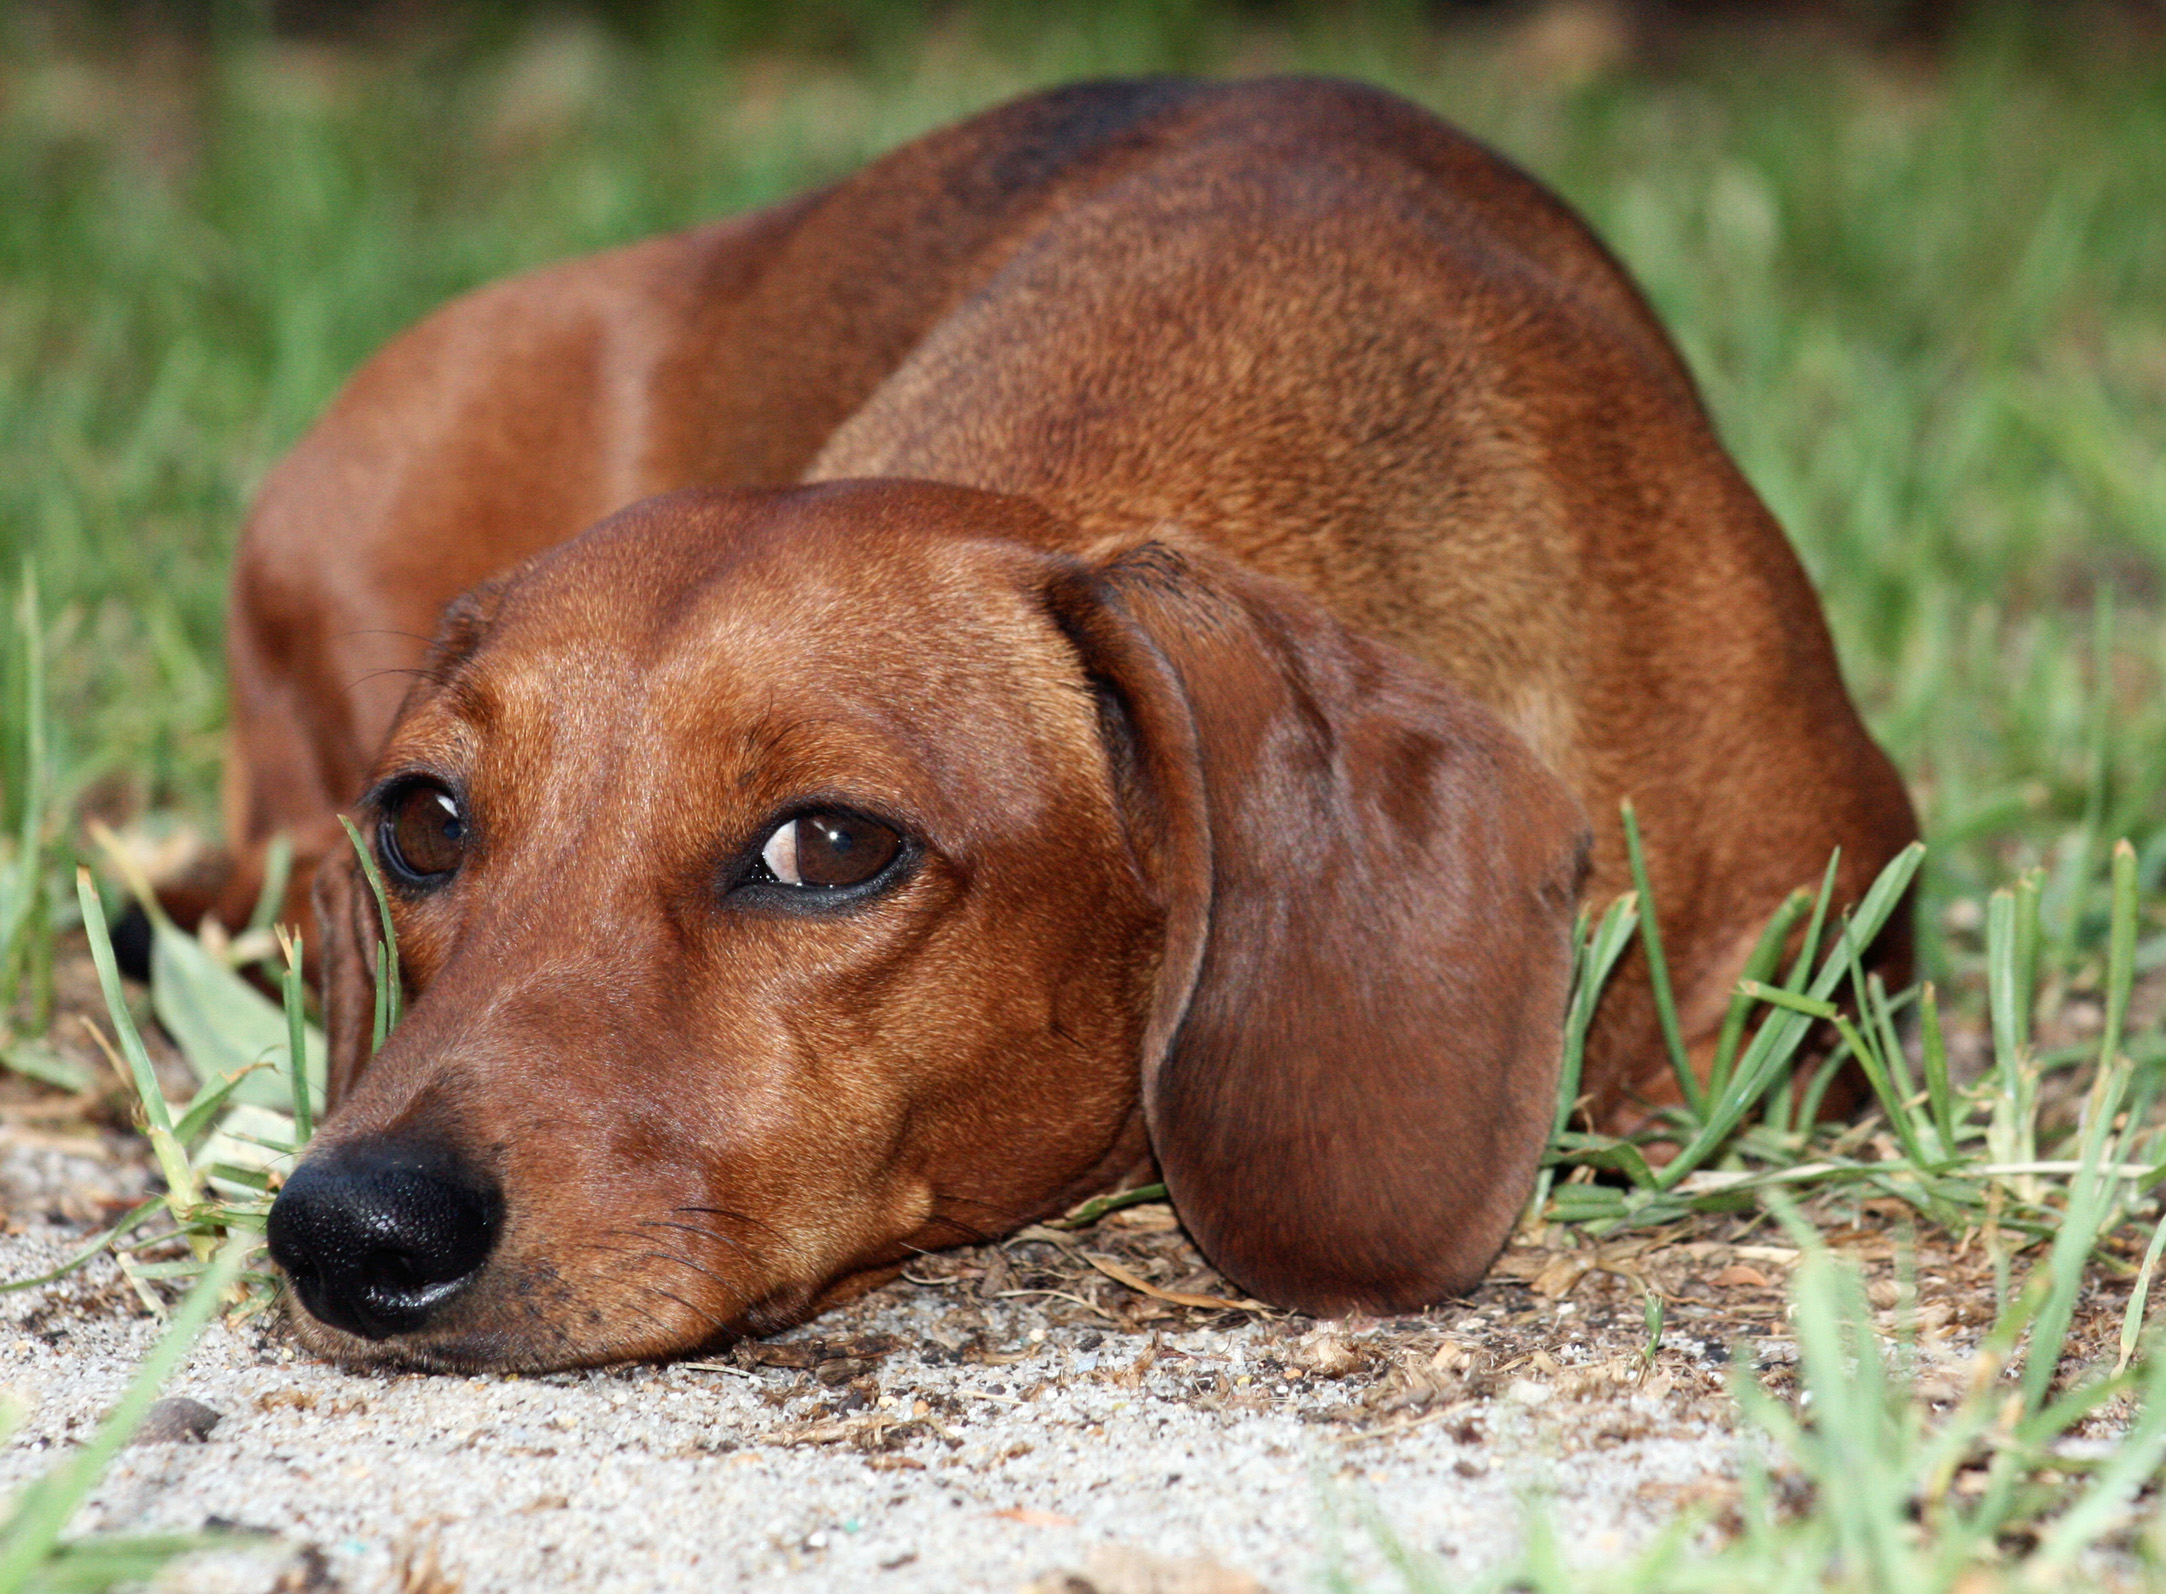 Dog Photo And Wallpaper Beautiful Wistful Dachshund Pictures